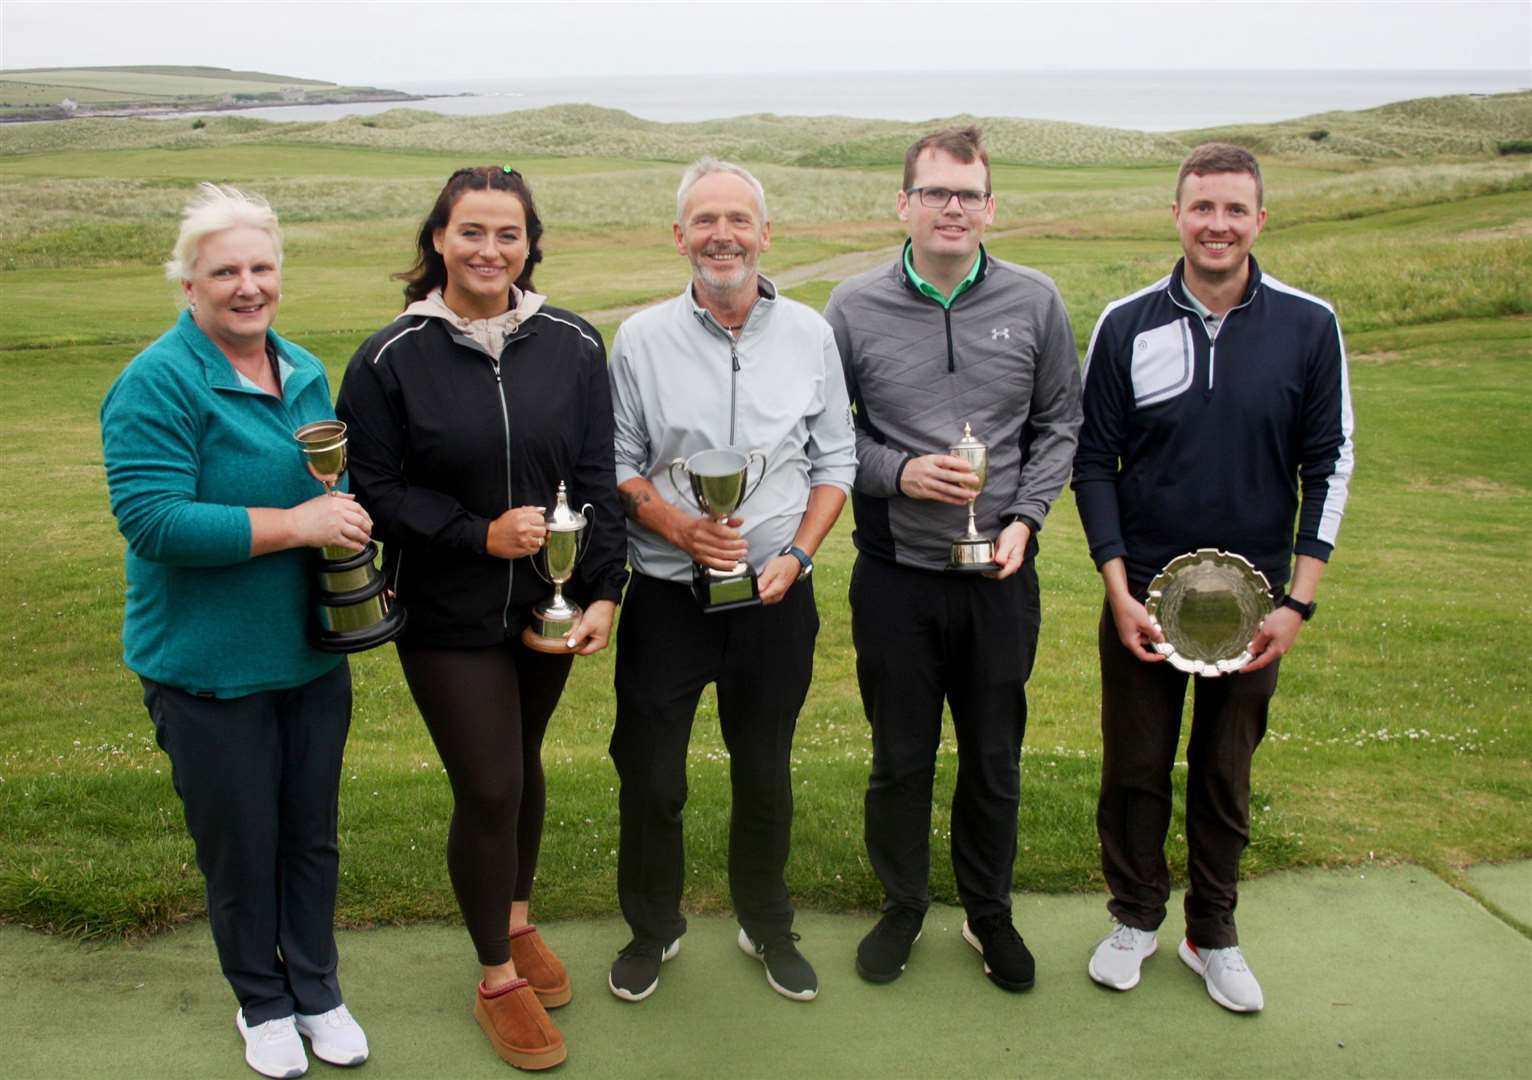 Prizewinners from club championships finals night – (from left) Pauline Craig, ladies' handicap; Eleanor Tunn, ladies' scratch; Donald Mowat, gents' seniors; Brent Munro, gents' scratch; and Lee Malcolm, gents' handicap.